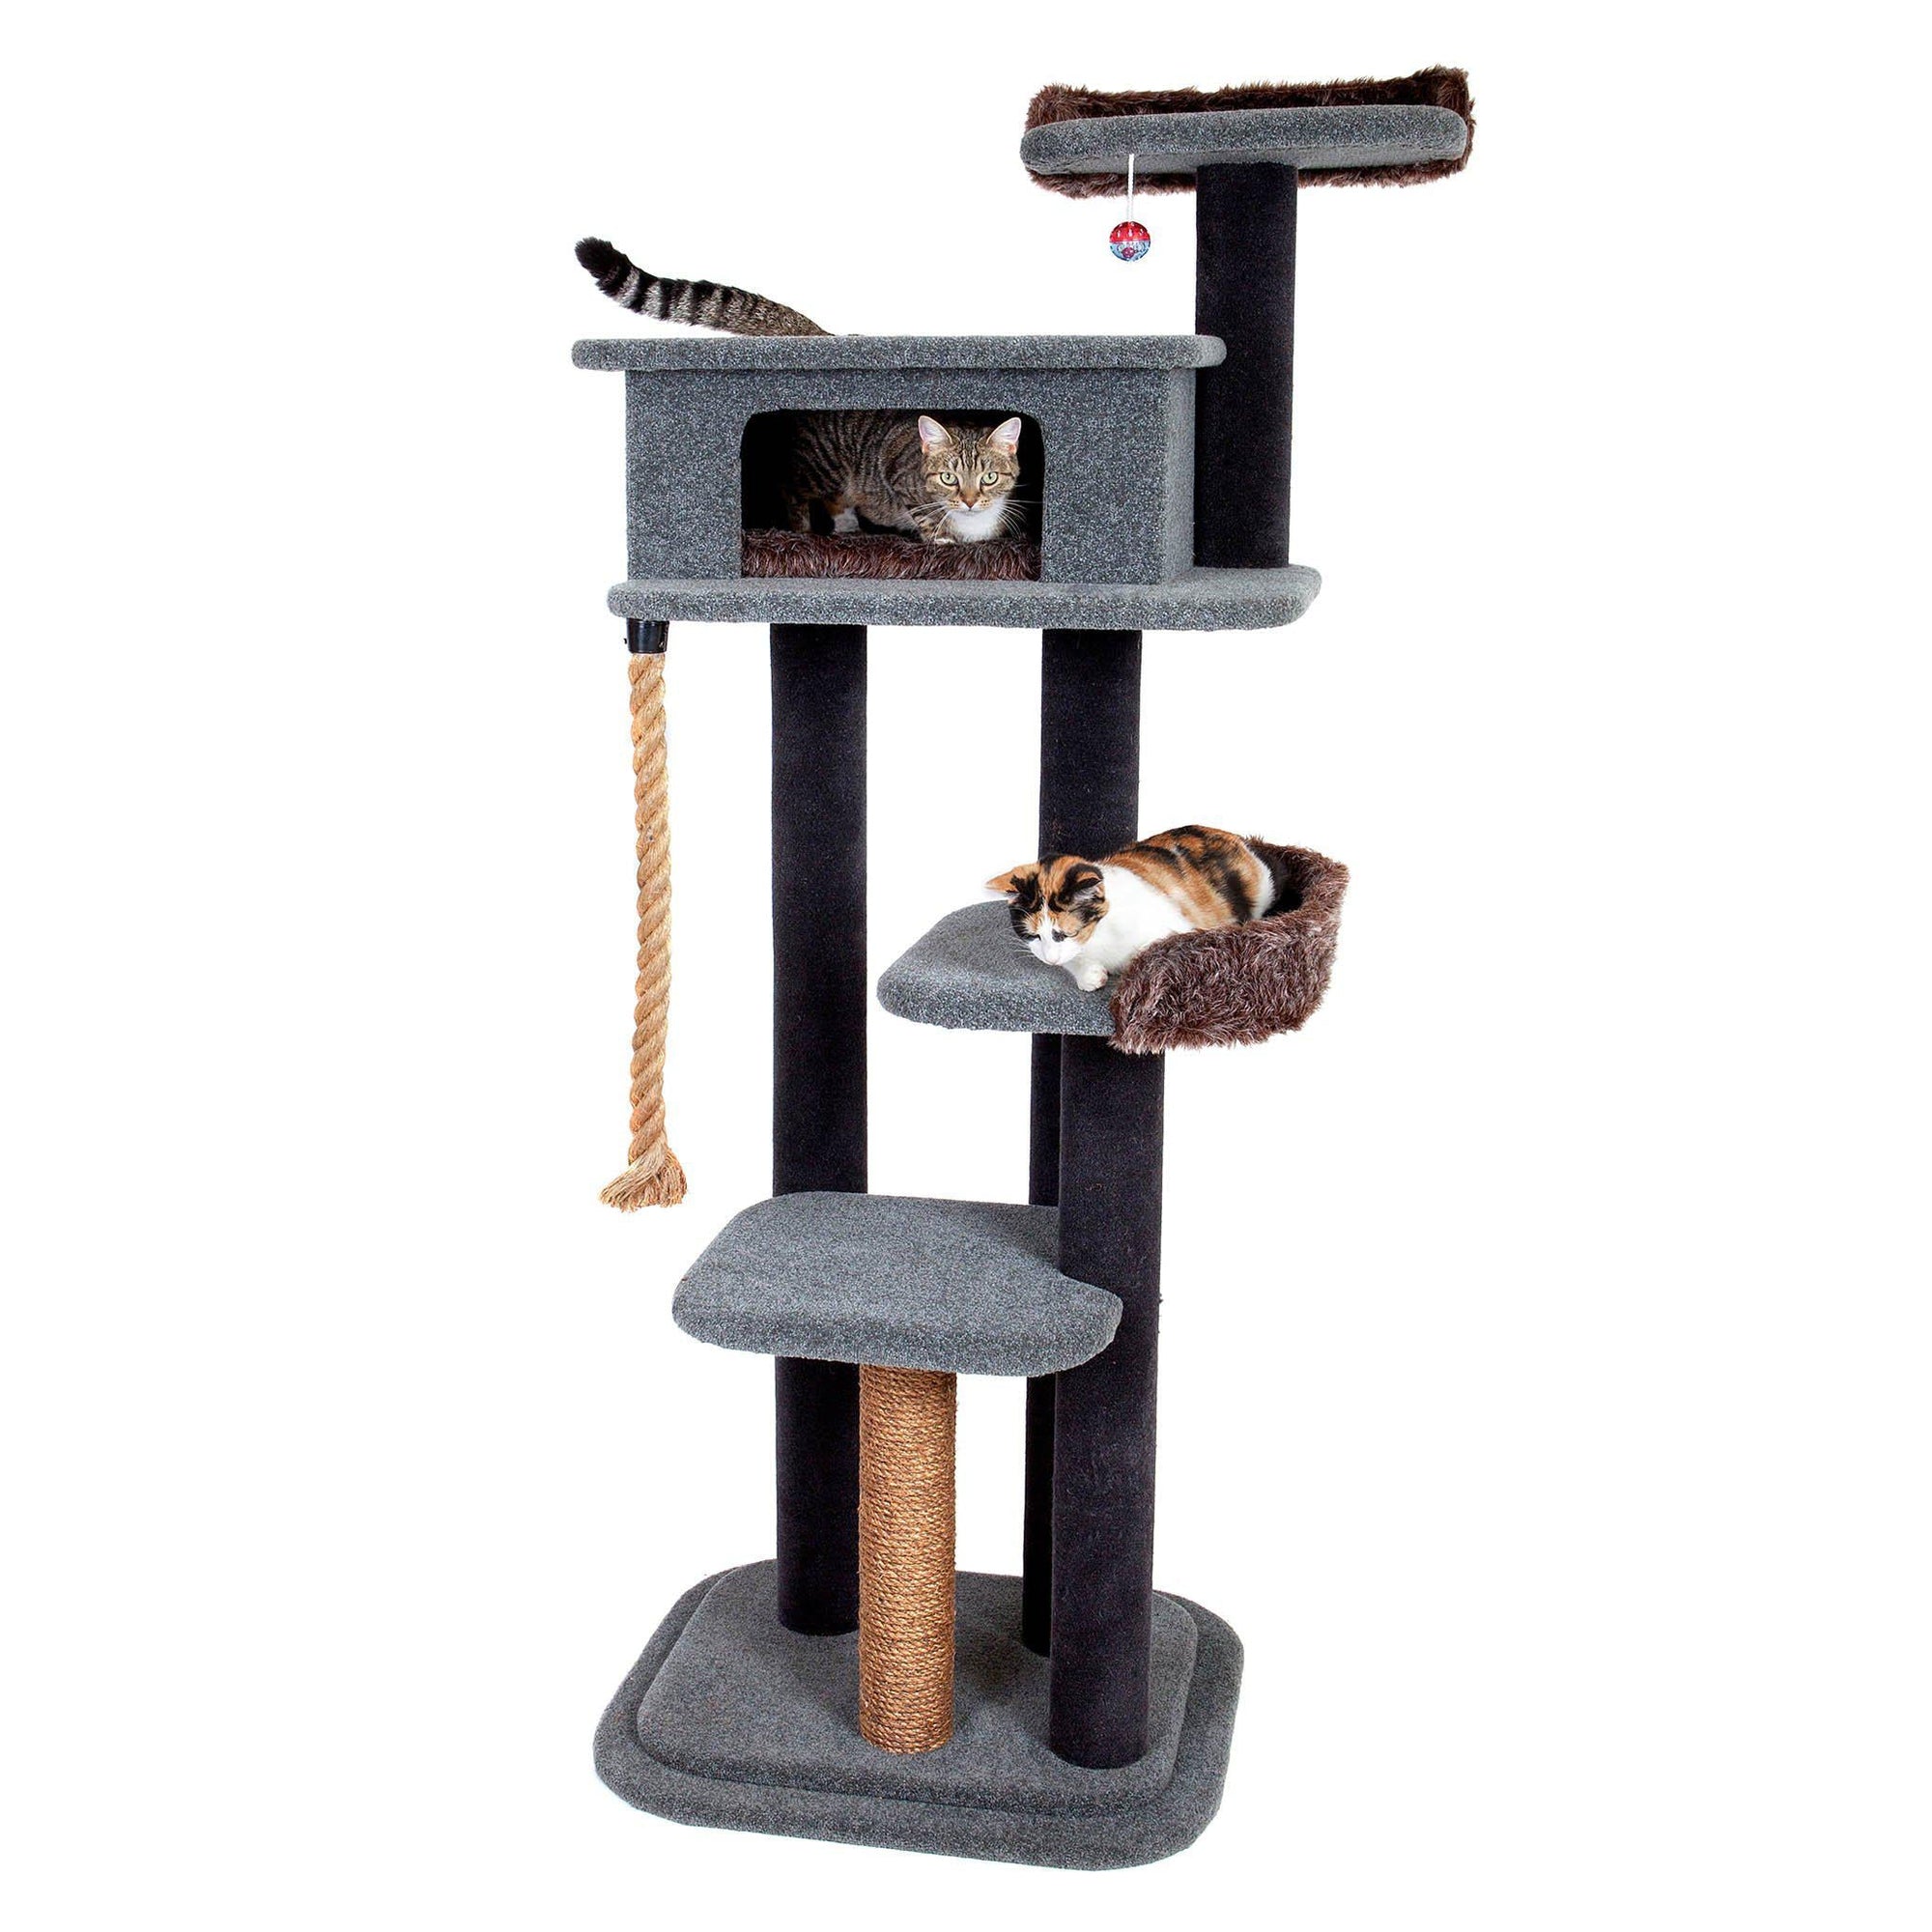 KatAttack New Yorker - ComfyPet Products